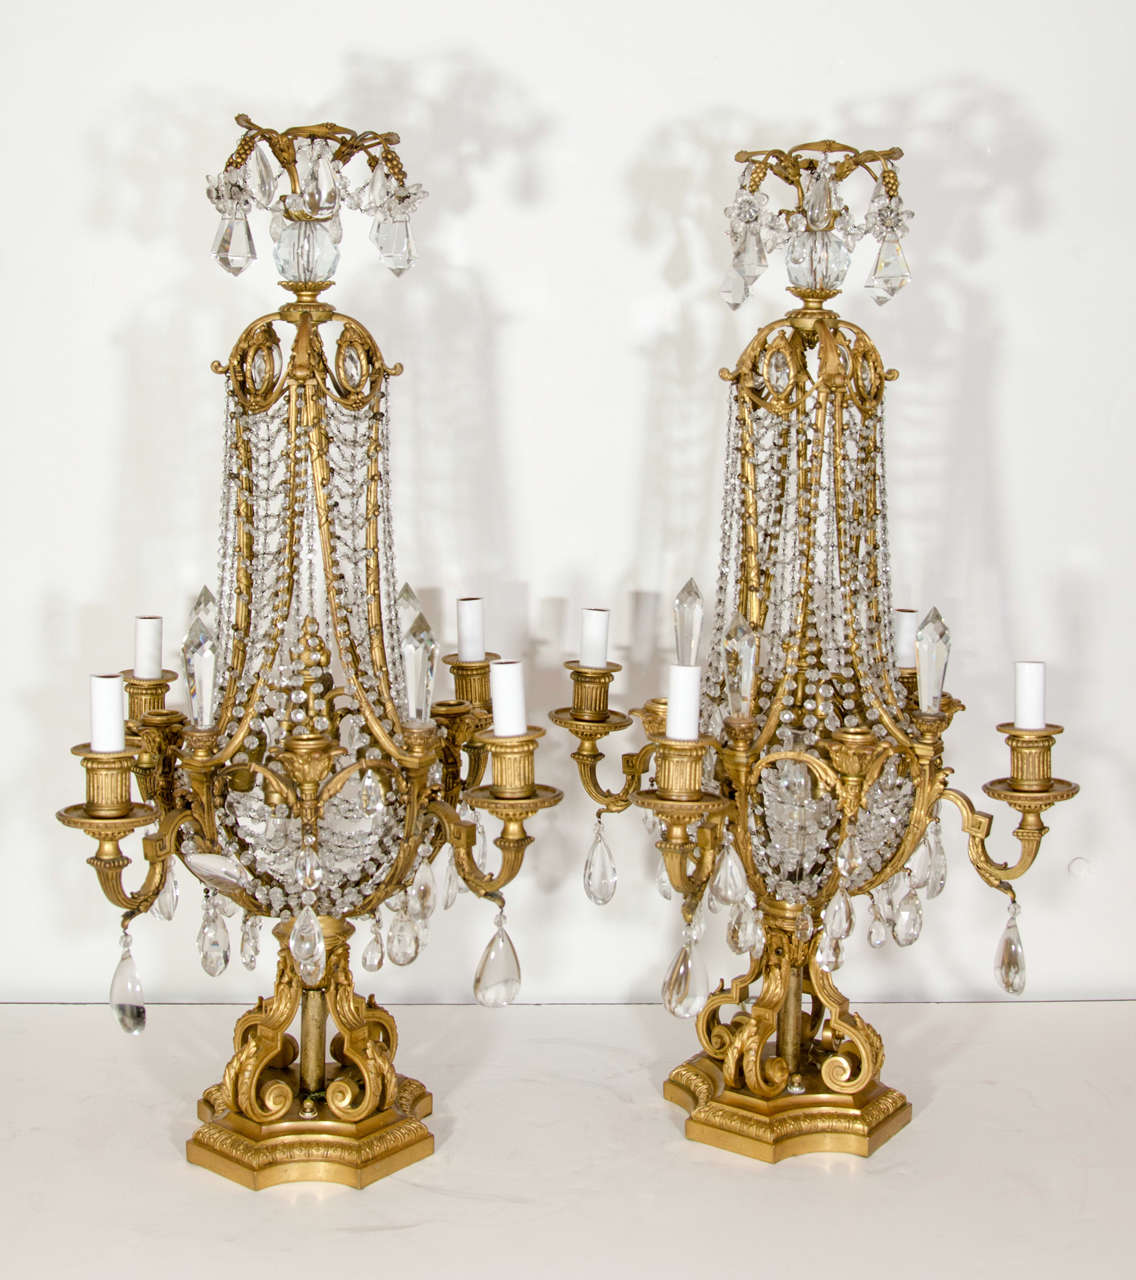 PR EXQUISITE & LARGE ANTIQUE FRENCH LOUIS XVI BACCARAT GILT BRONZE & CUT CRYSTAL MULTI LIGHT CANDELABRA/LAMPOS OF EXCEPTIONAL WORKMANSHIP EMBELLISHED WITH FINE LACE CRYSTAL CHAINS & FURTHER ADORNED WITH CUT CRYSTAL PRISMS, SIGNED BY BACCARAT, PARIS,